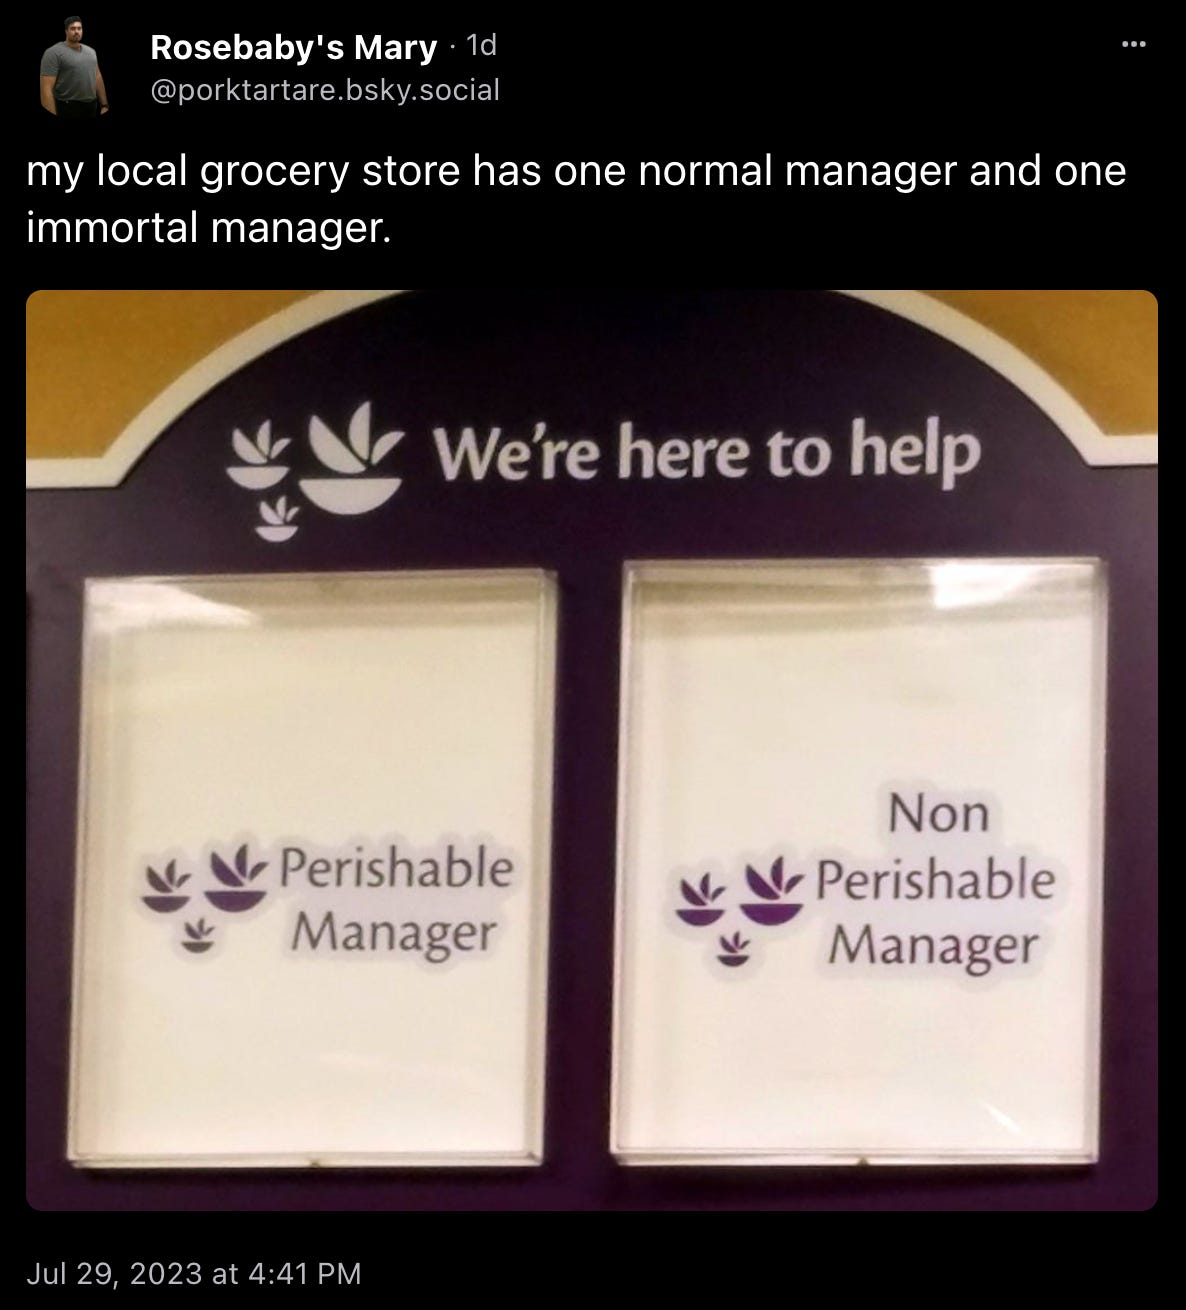 @porktartare skeeted: “my local grocery store has one normal manager and one immortal manager,” with a slightly blurry photo of a grocery store sign that says “We’re here to help” above panels labeled “Perishable manager” and “Non-perishable manager”